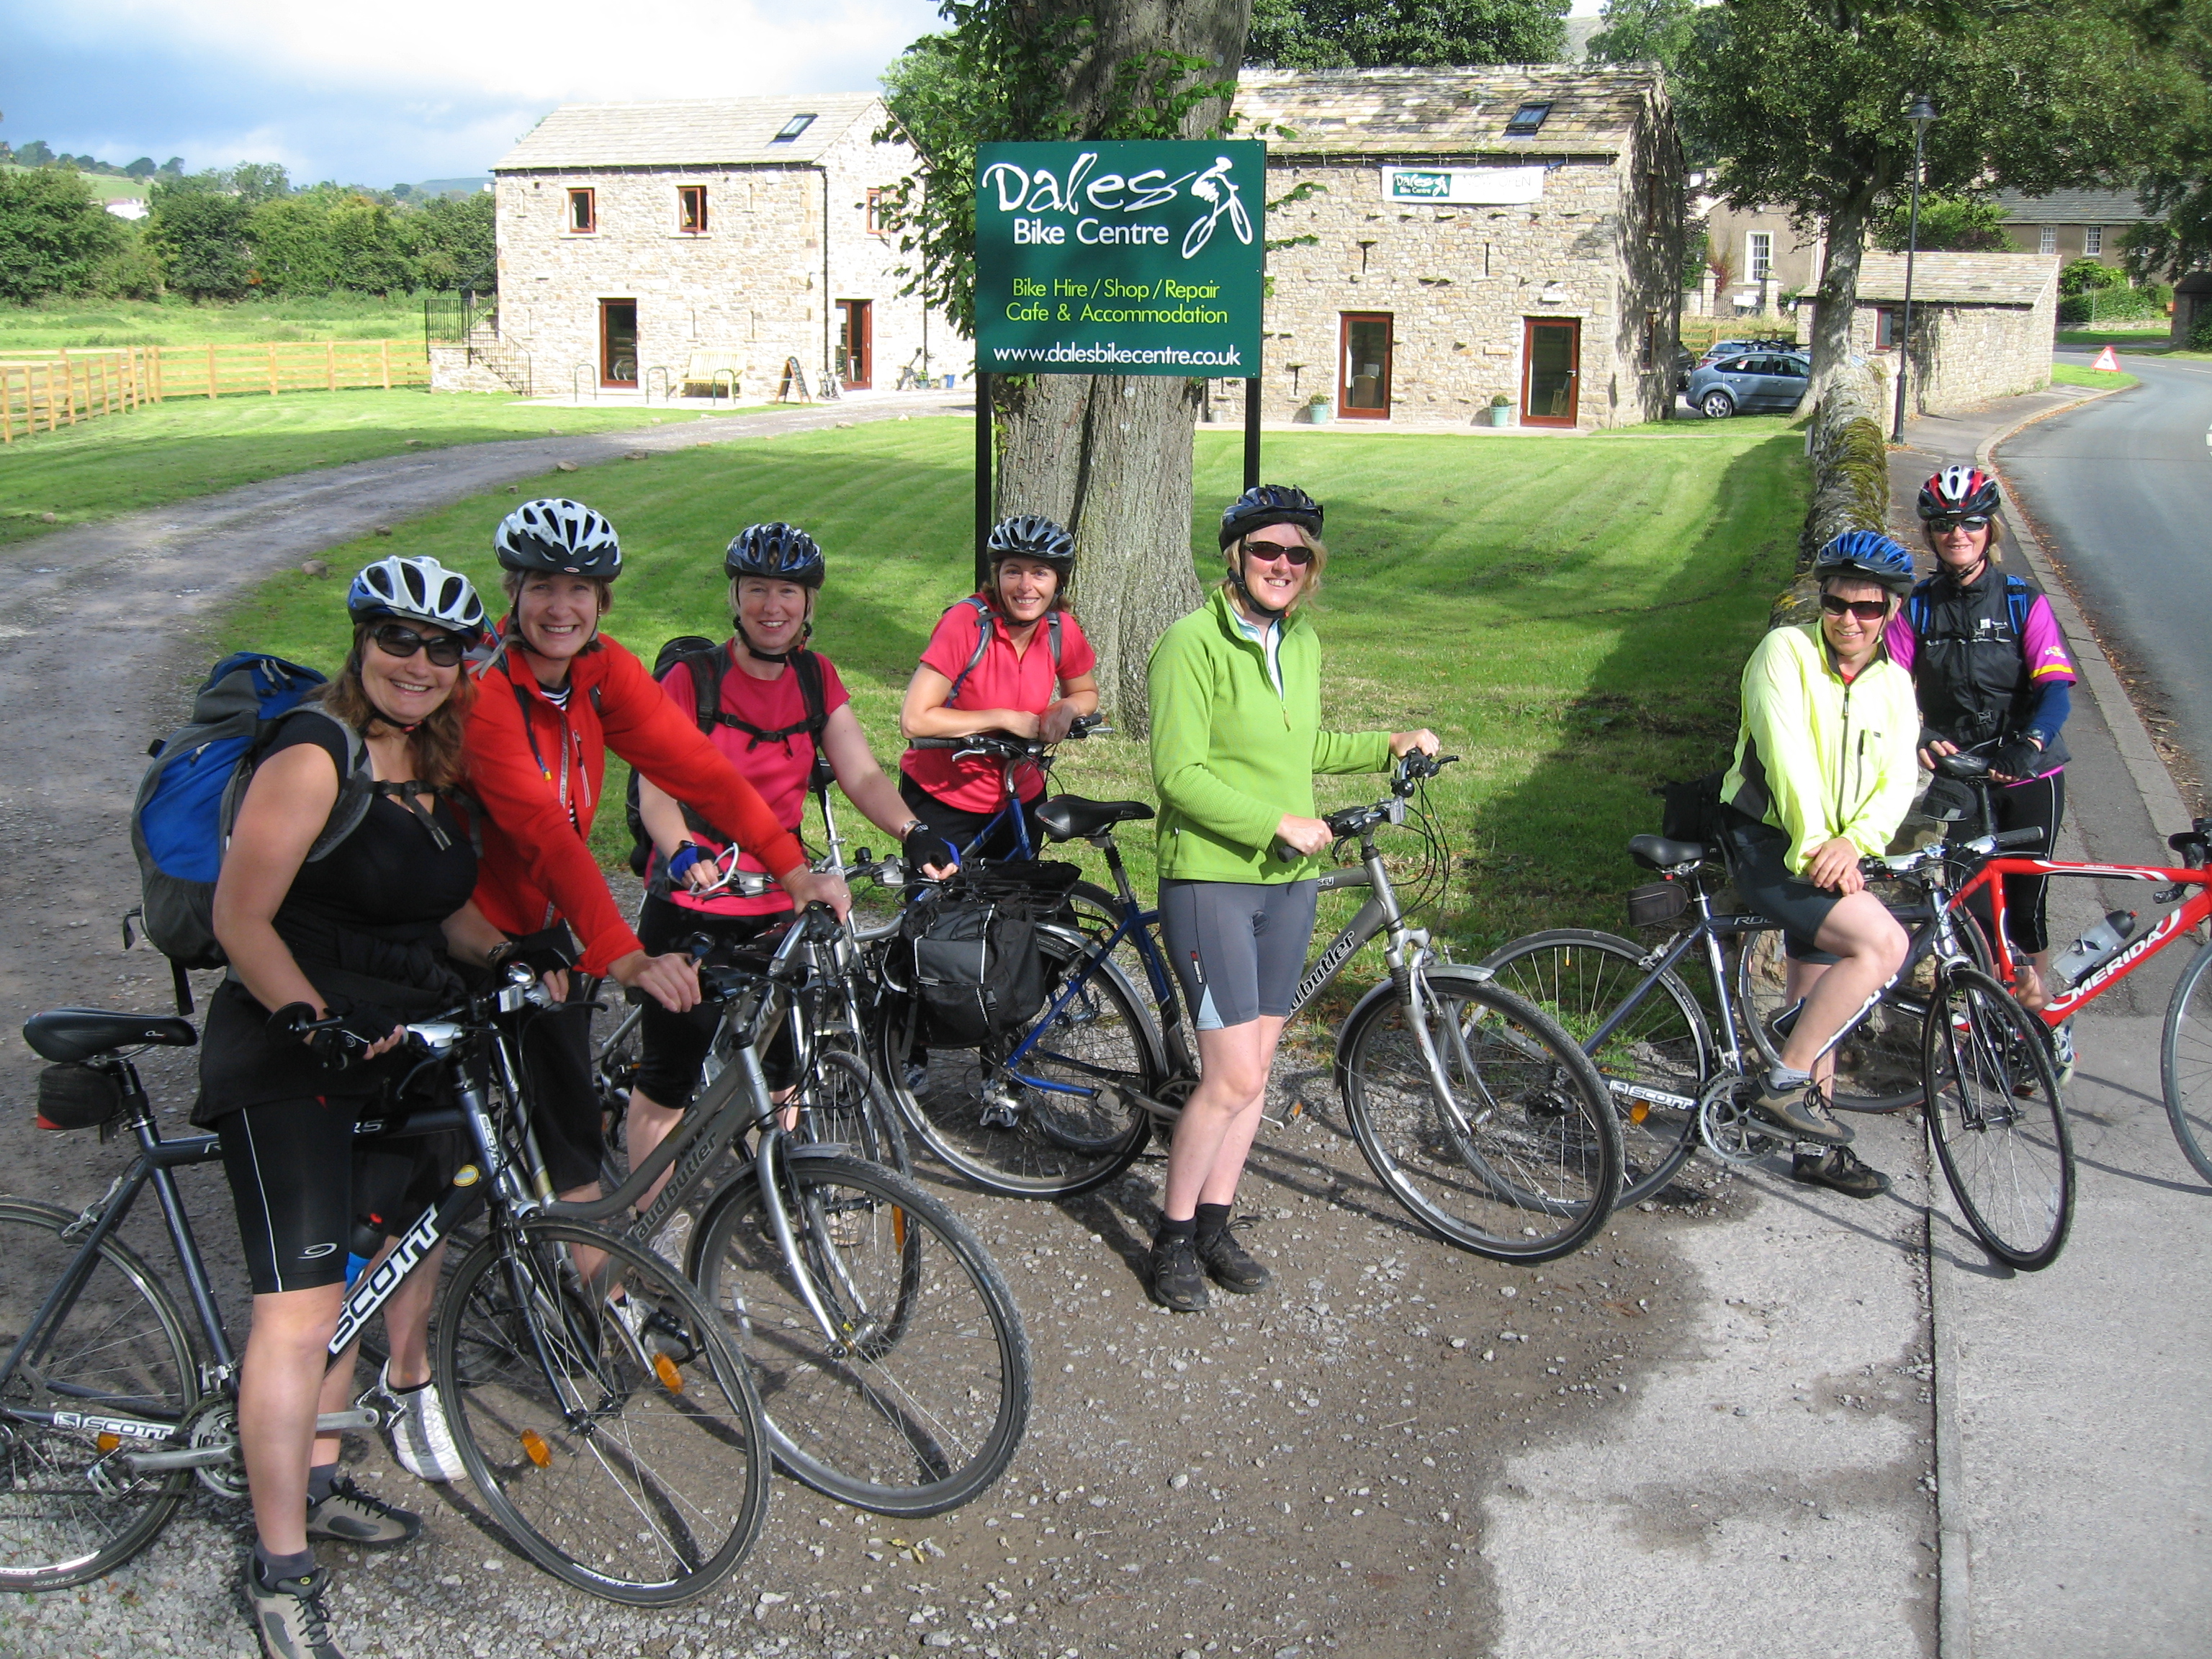 Heading out from the Dales Bike Centre